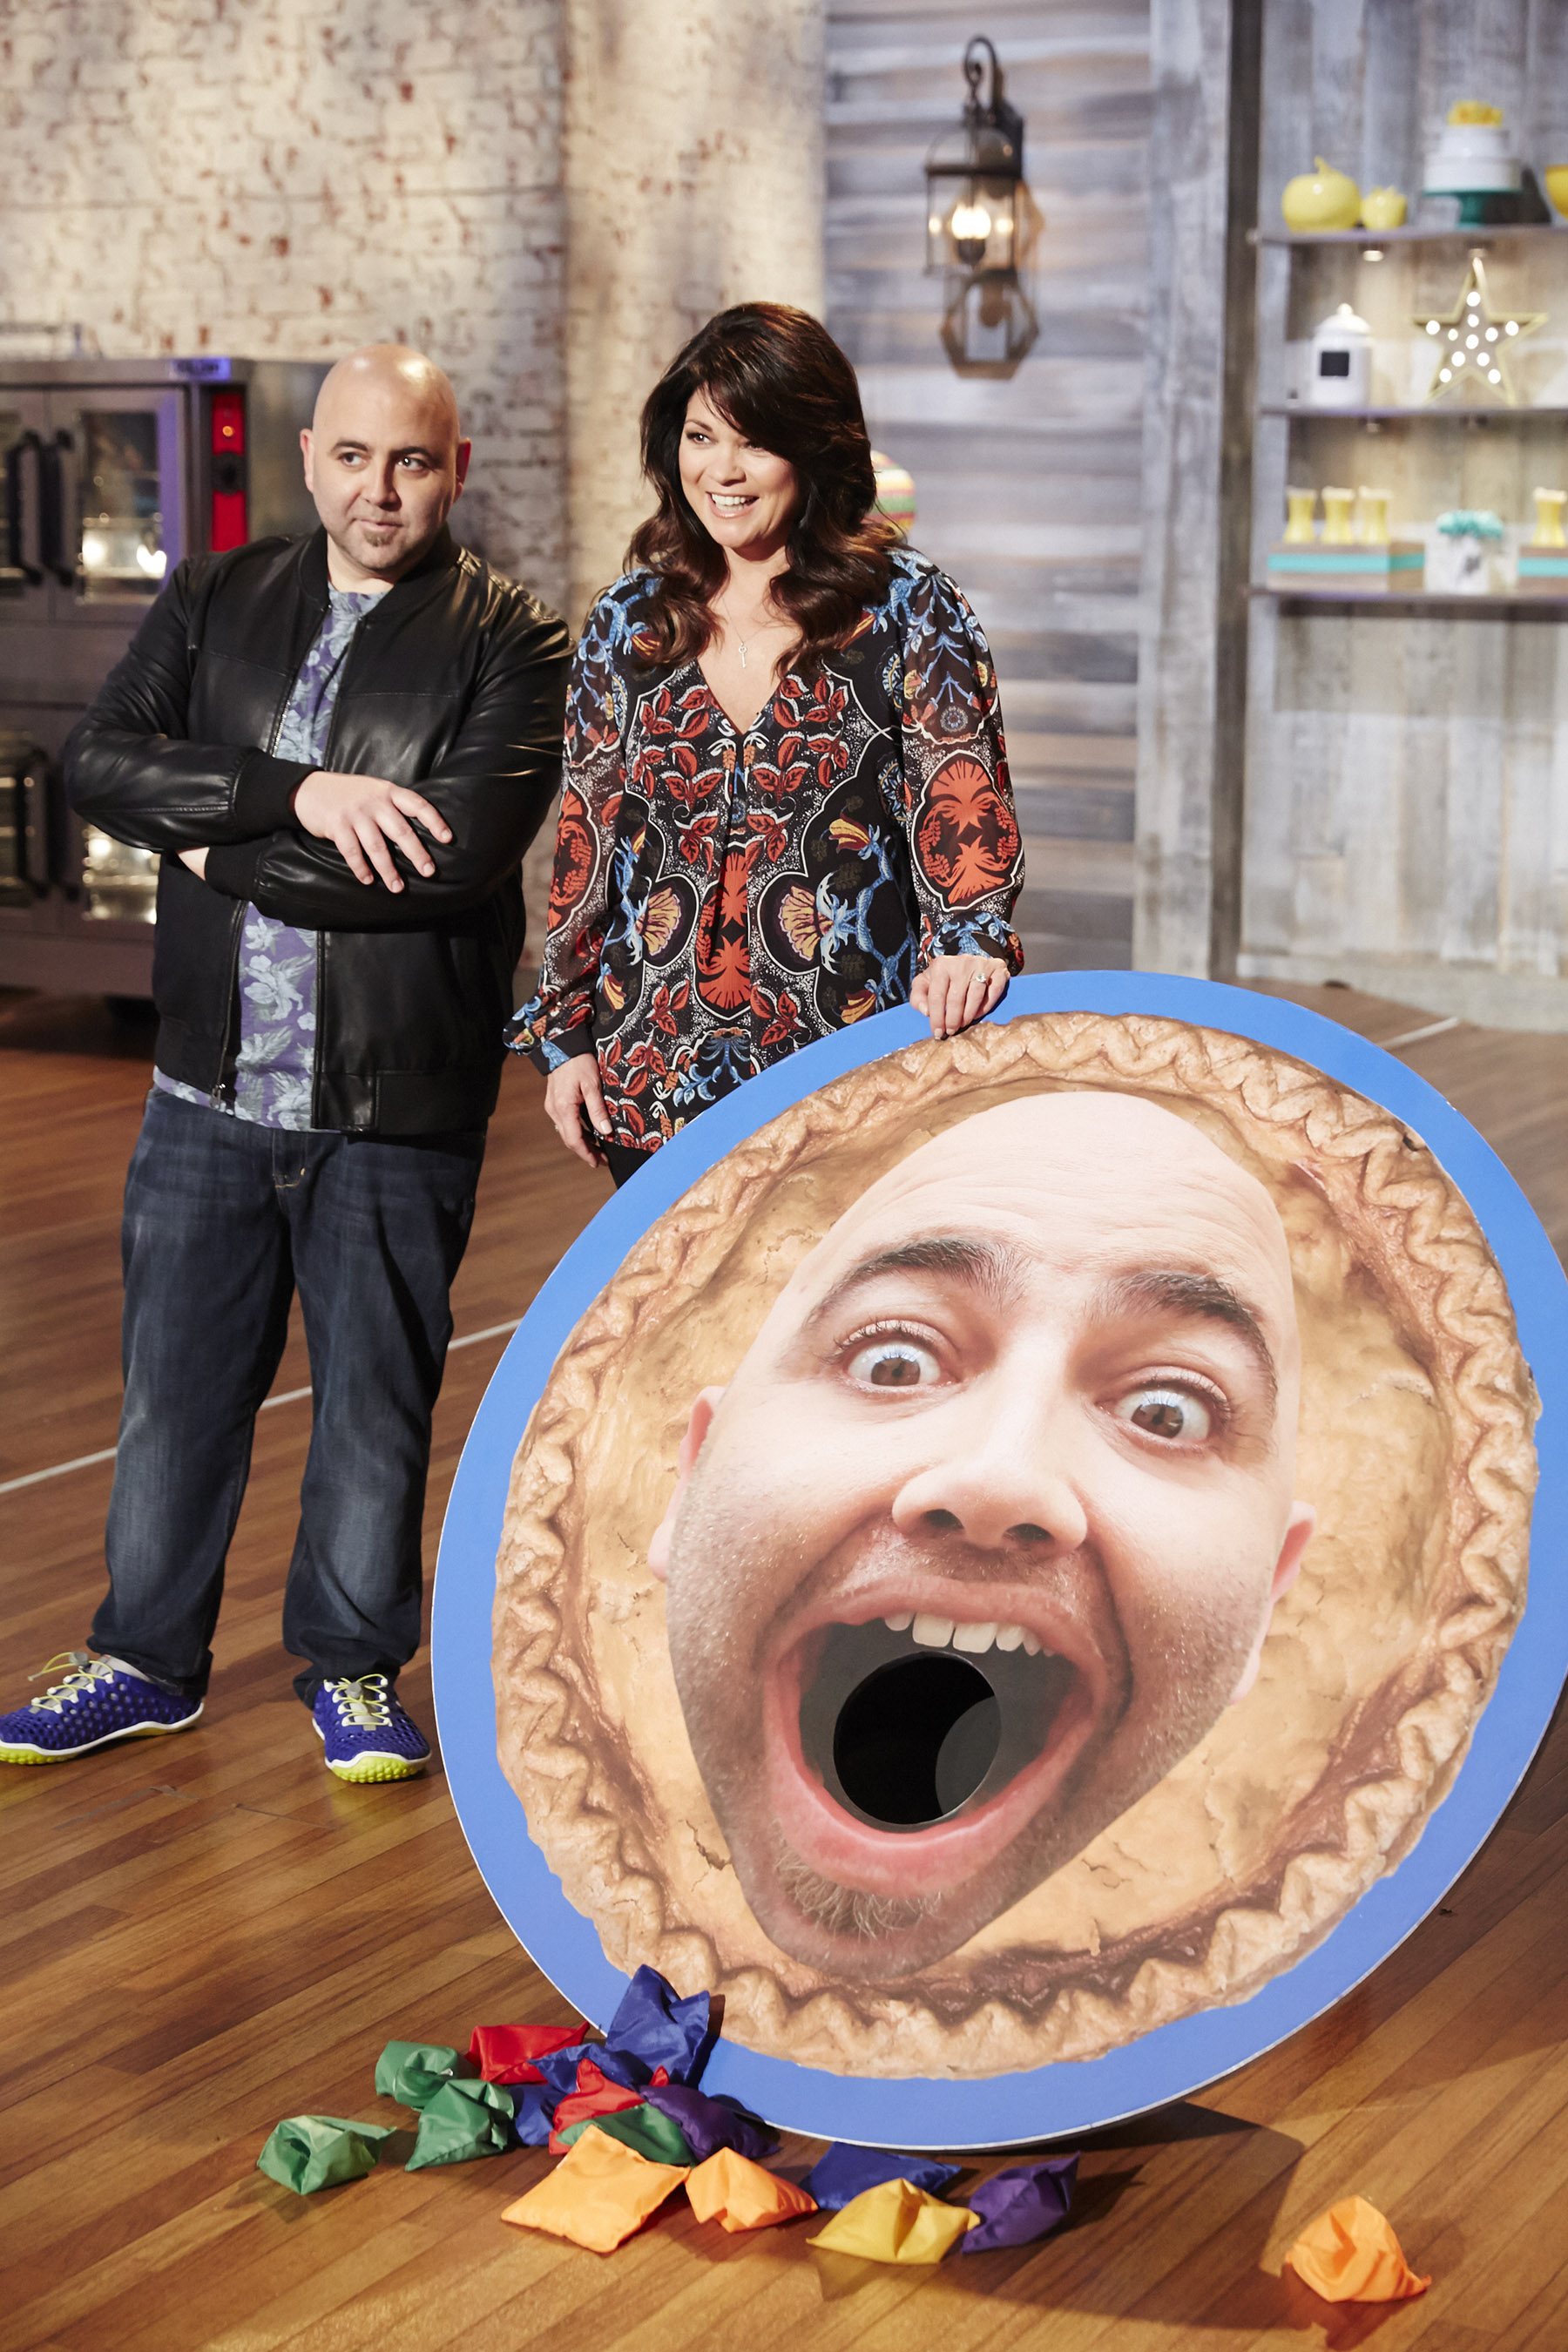 Hosts Duff Goldman and Valerie Bertinelli share a challenge on Food Network's Kids Baking Championship